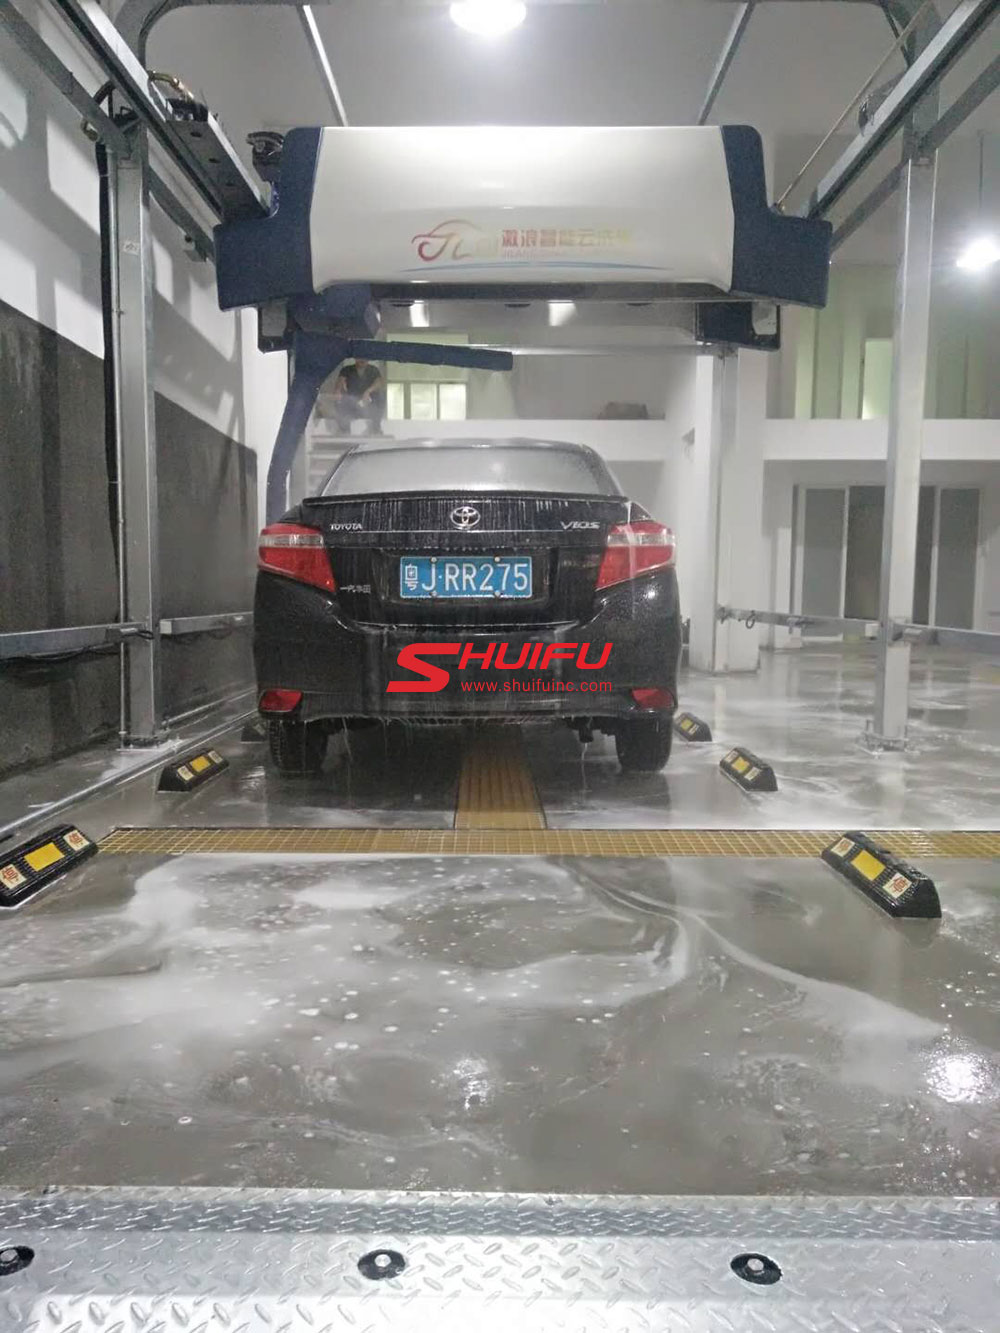 Automatic-car-wash-machine-AXE-OVERHEAD-touchless-carwash-system-installation-finished-in-Asia-manufactured-by-SHUIFU-CHINA-11